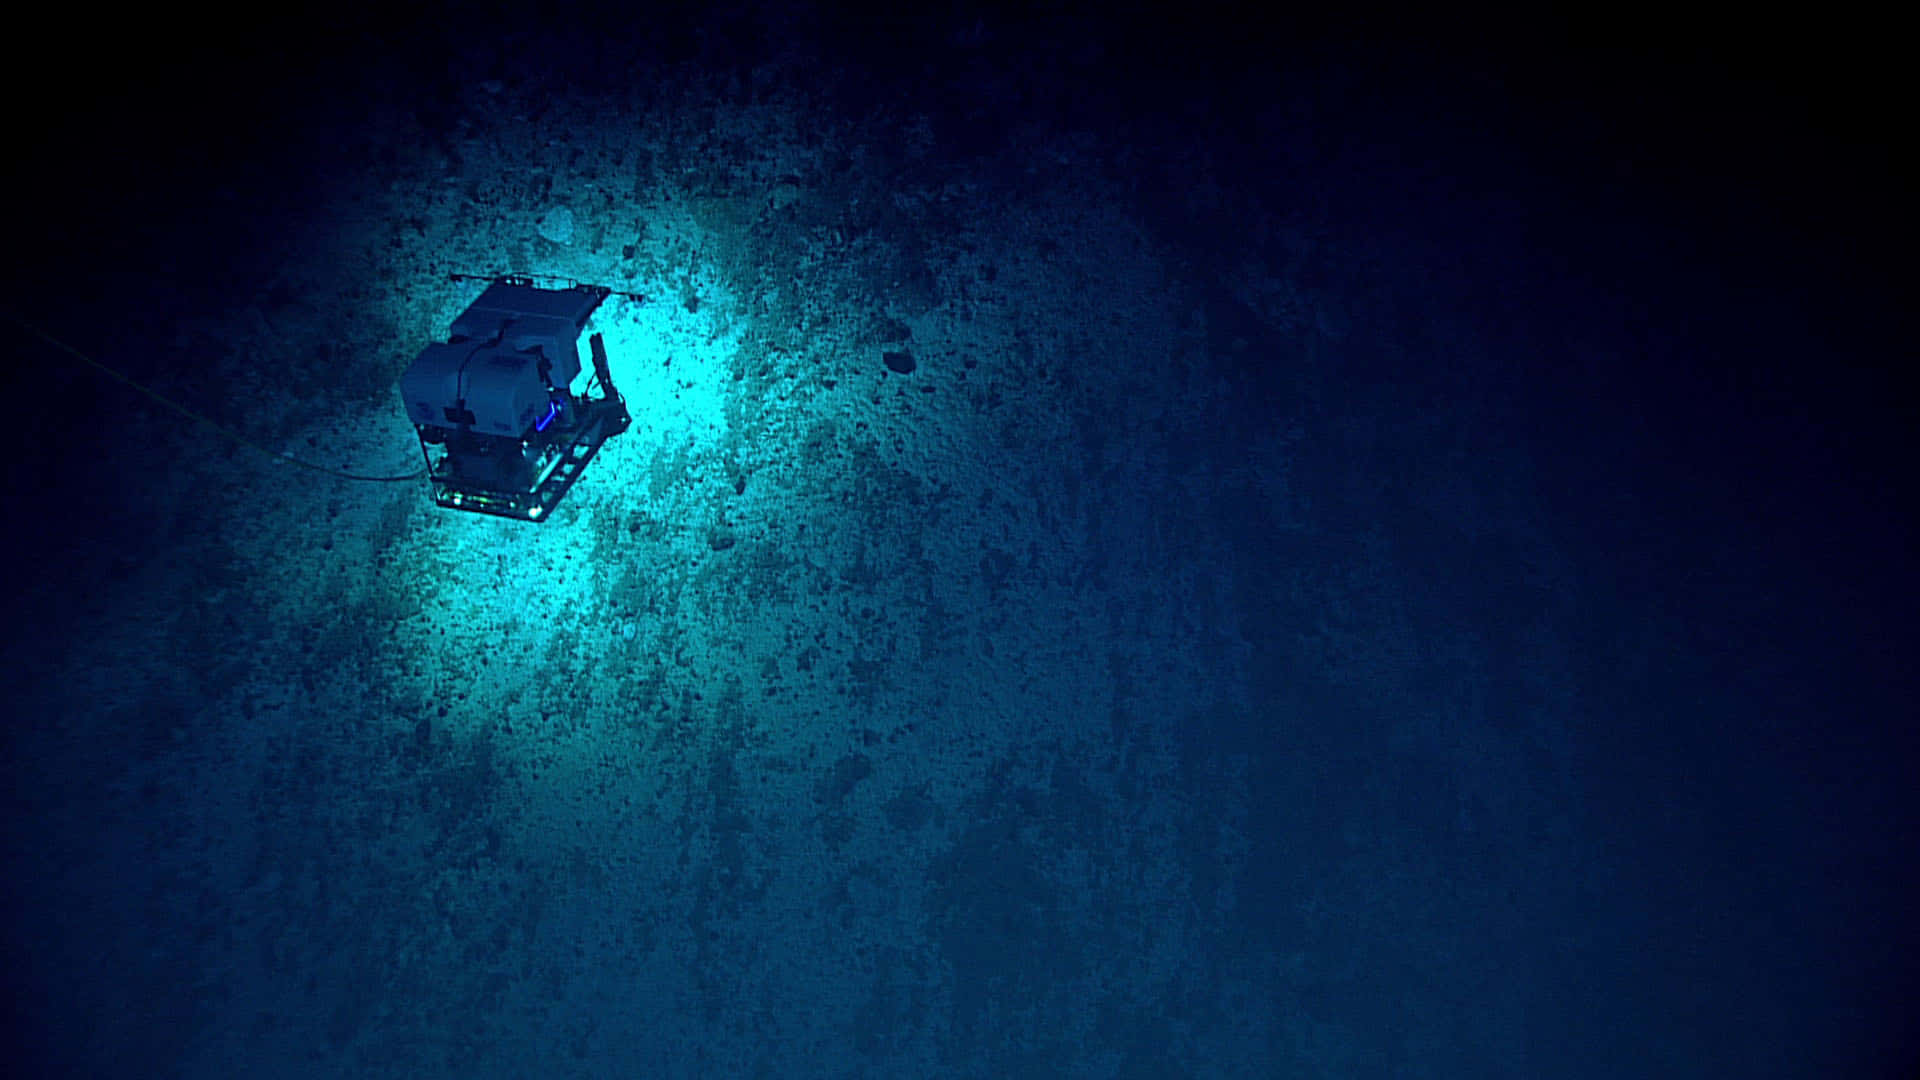 Exploration of the deepest trench in the ocean – Mariana Trench